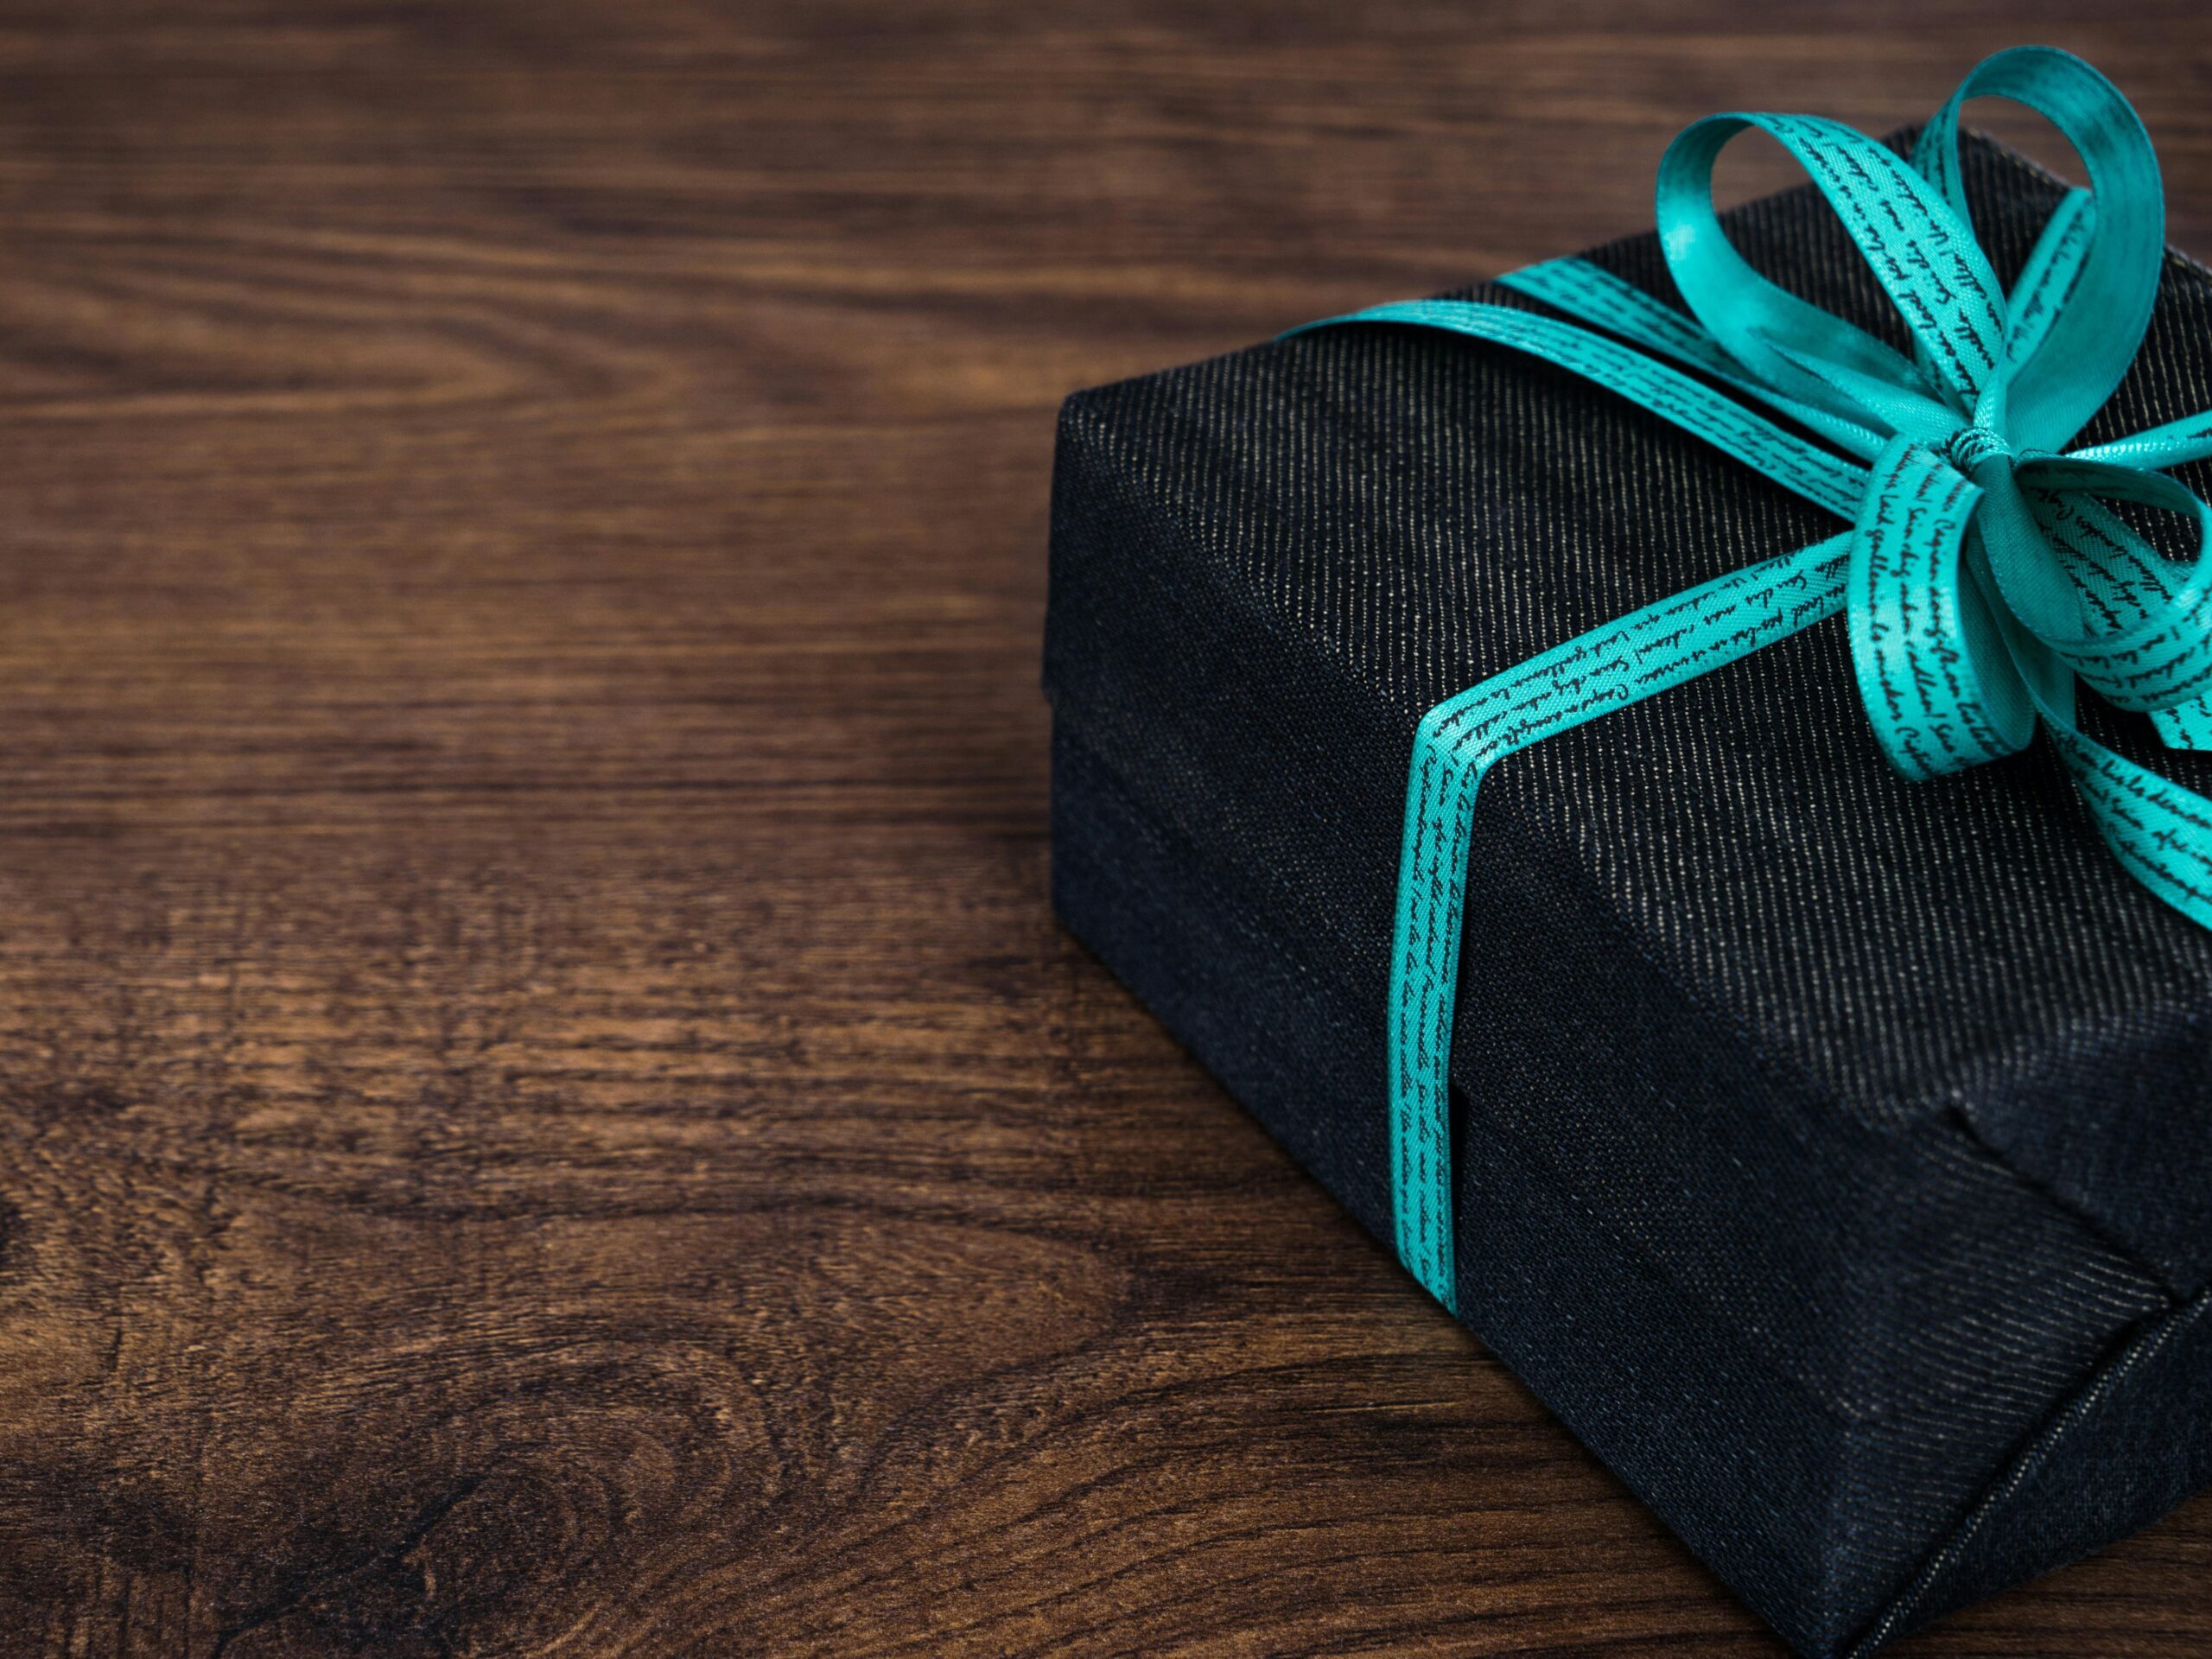 Photo of a finely wrapped gift. Photo by Pixabay: https://www.pexels.com/photo/black-gift-box-on-wooden-surface-157879/